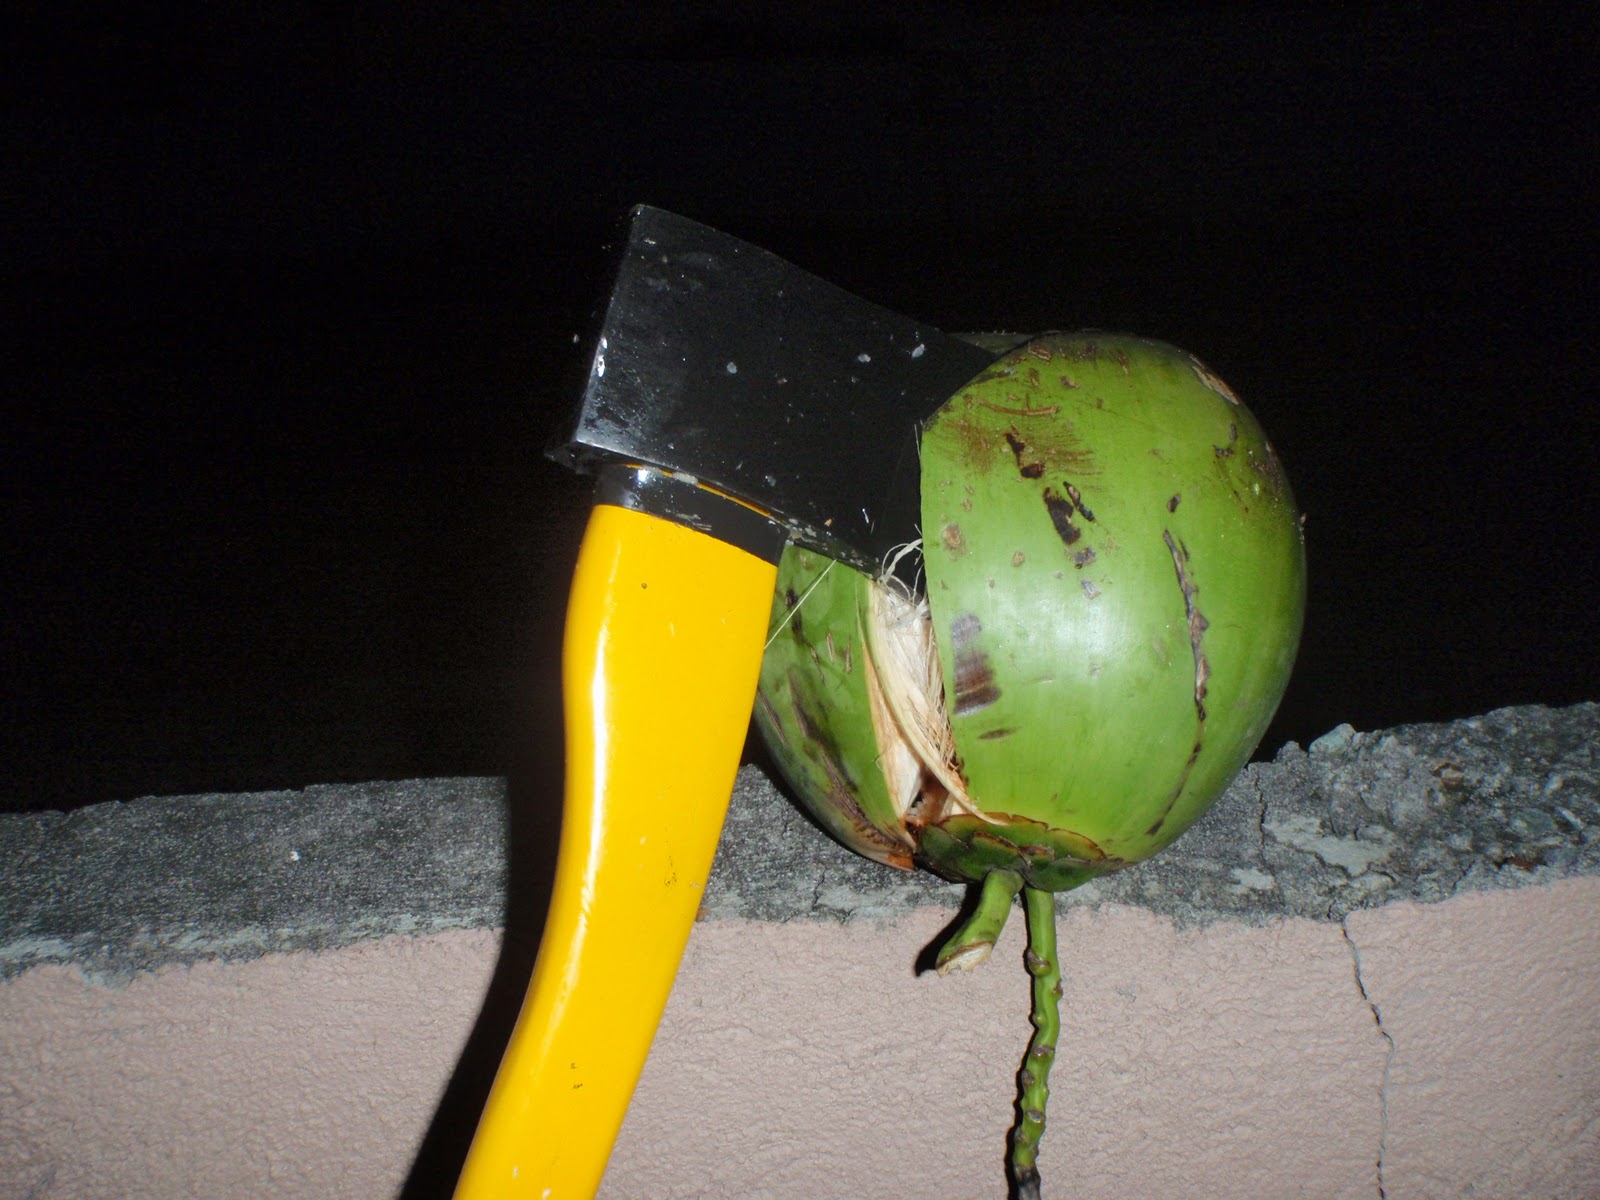 THE ZOMBIE HUNTER: A Survivalist's Journal: The Smashing Coconut ...